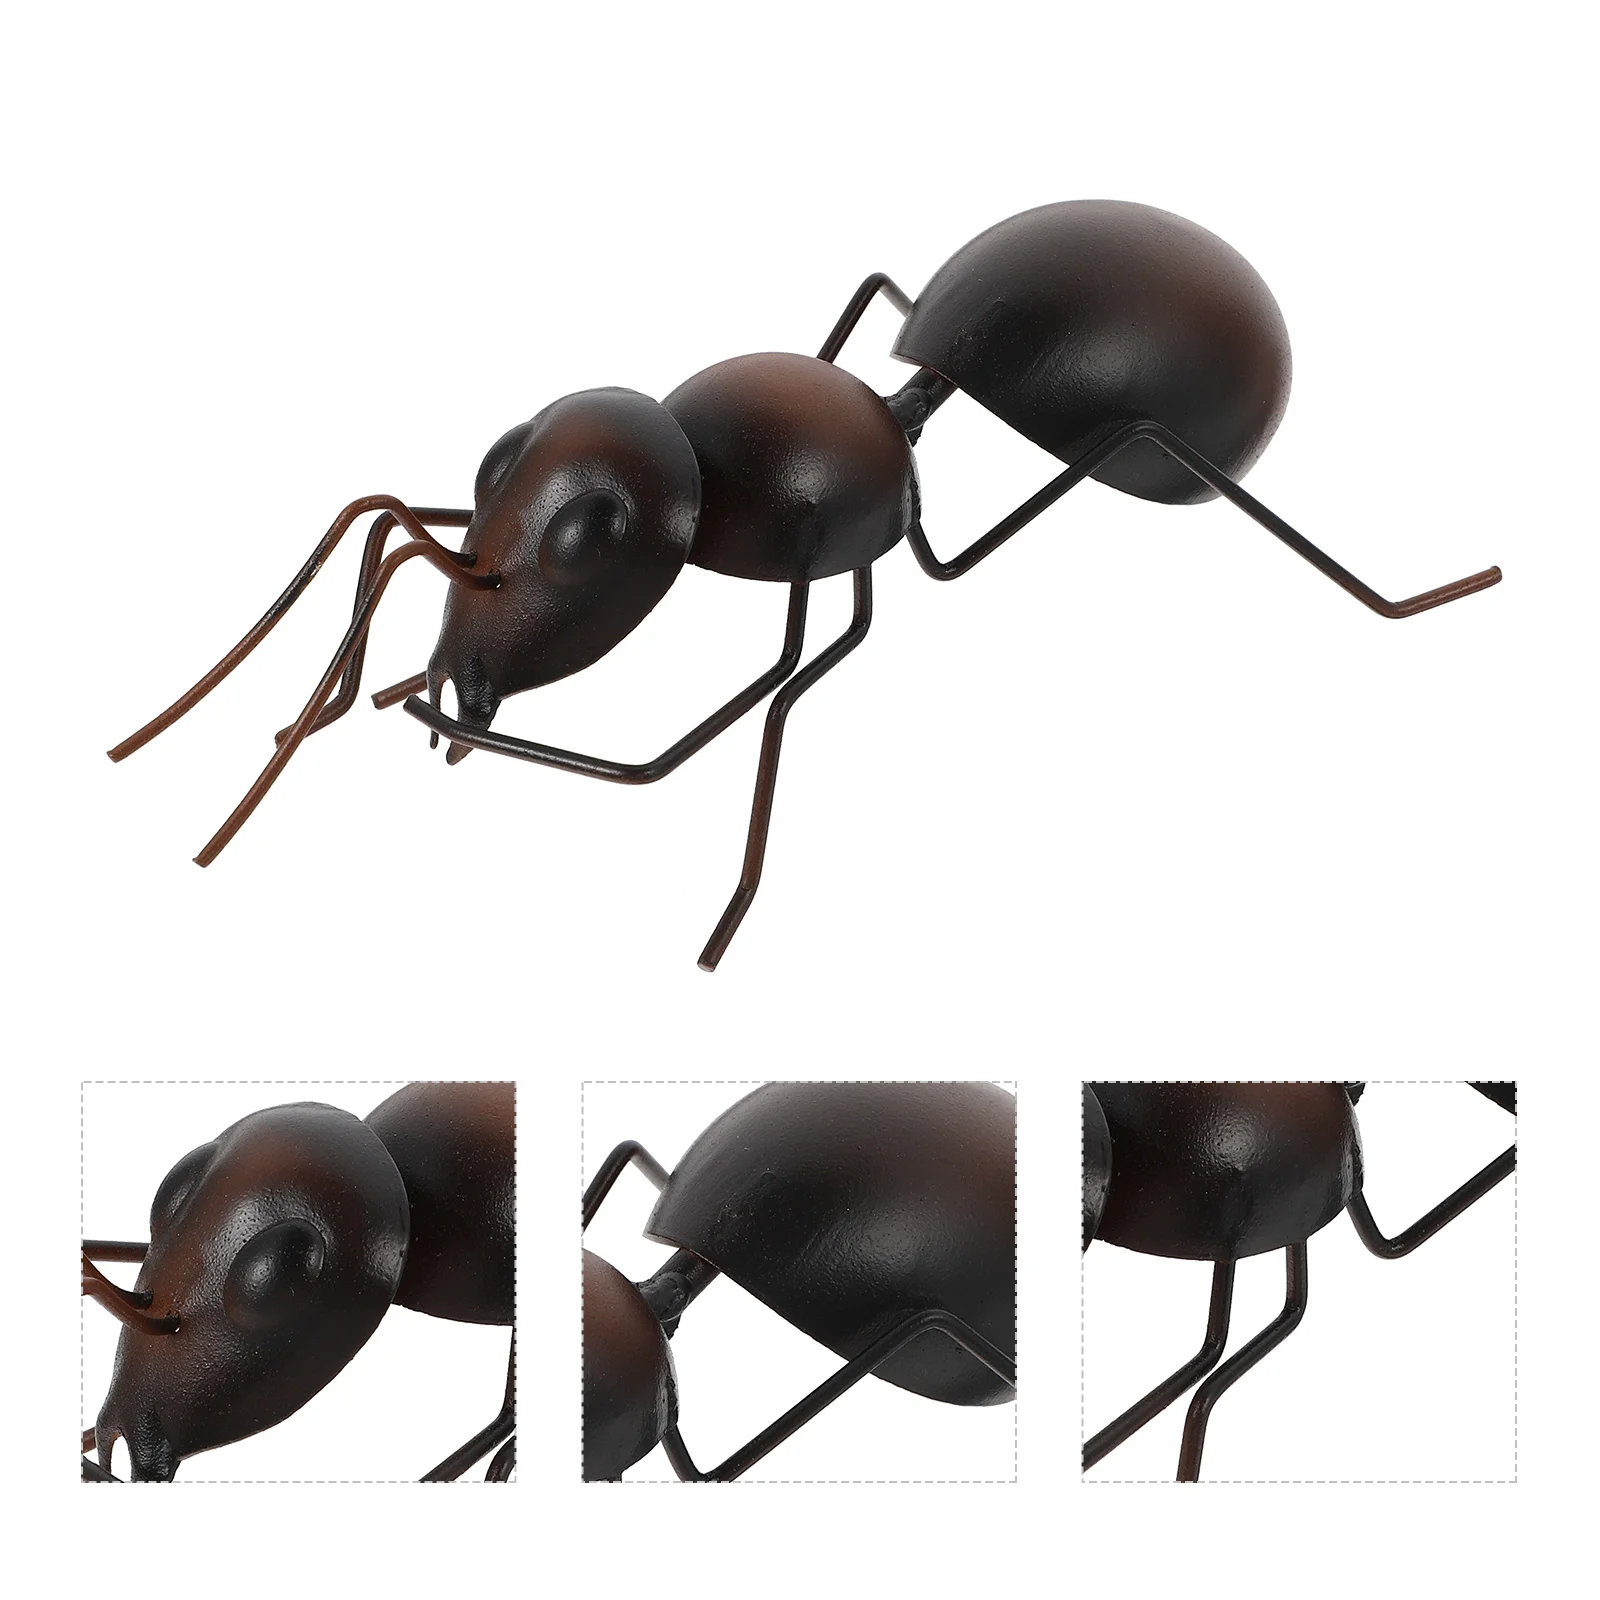 

Wrought Iron Ant Ornaments Simulation Insect Lifelike Model Figurine Creative Outdoor Garden Balcony Lawn Decoration